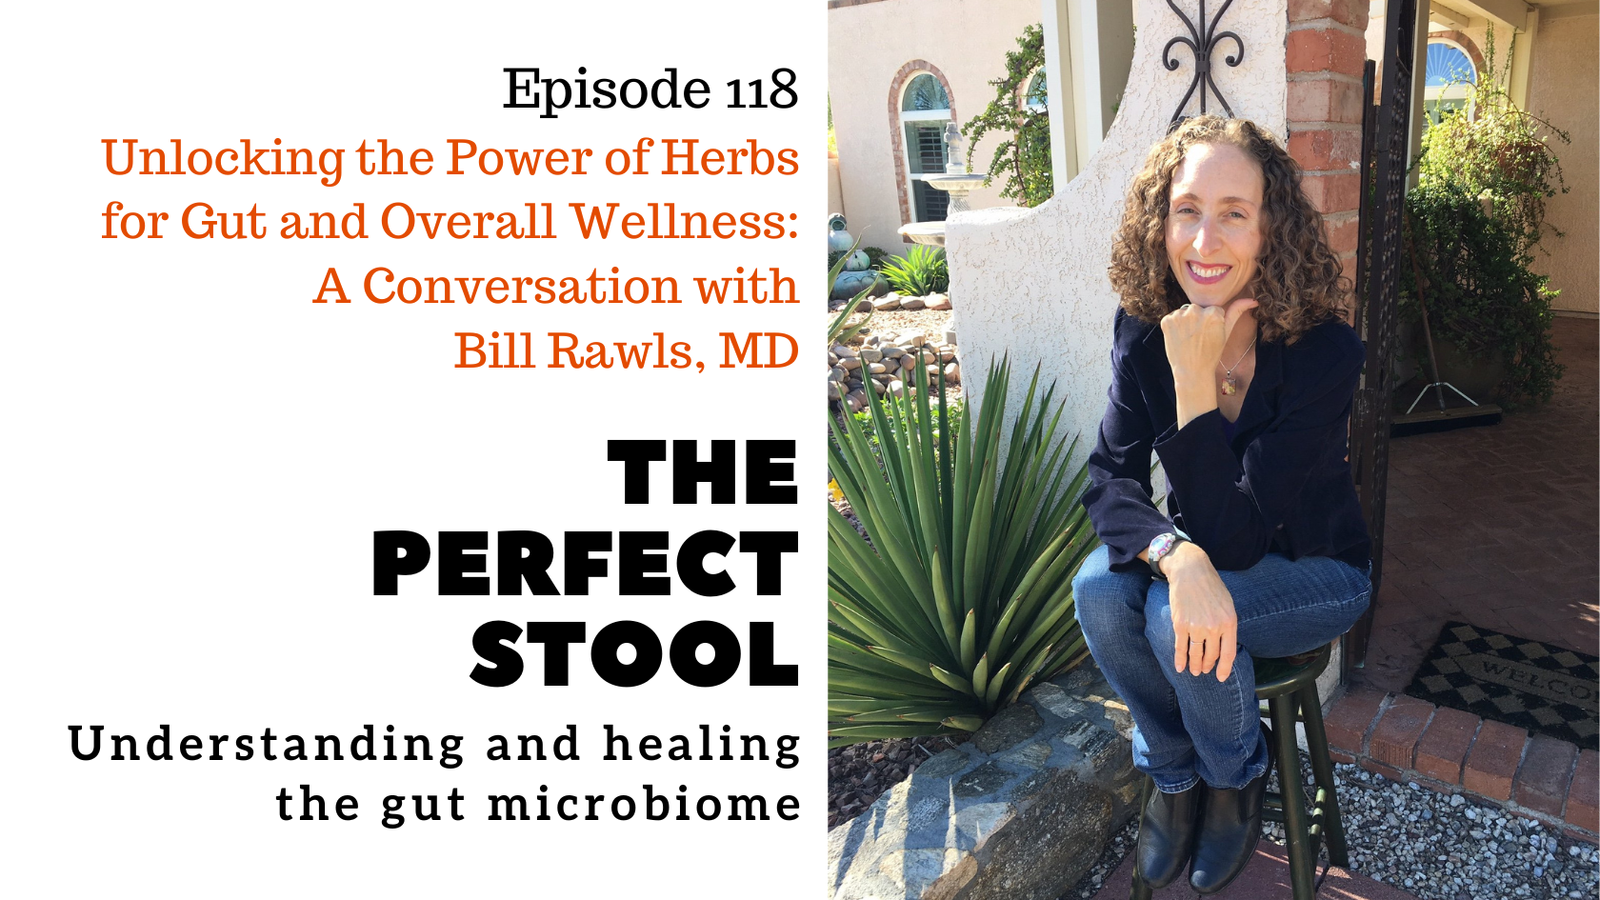 Unlocking the Power of Herbs for Gut and Overall Wellness: A Conversation with Bill Rawls, MD